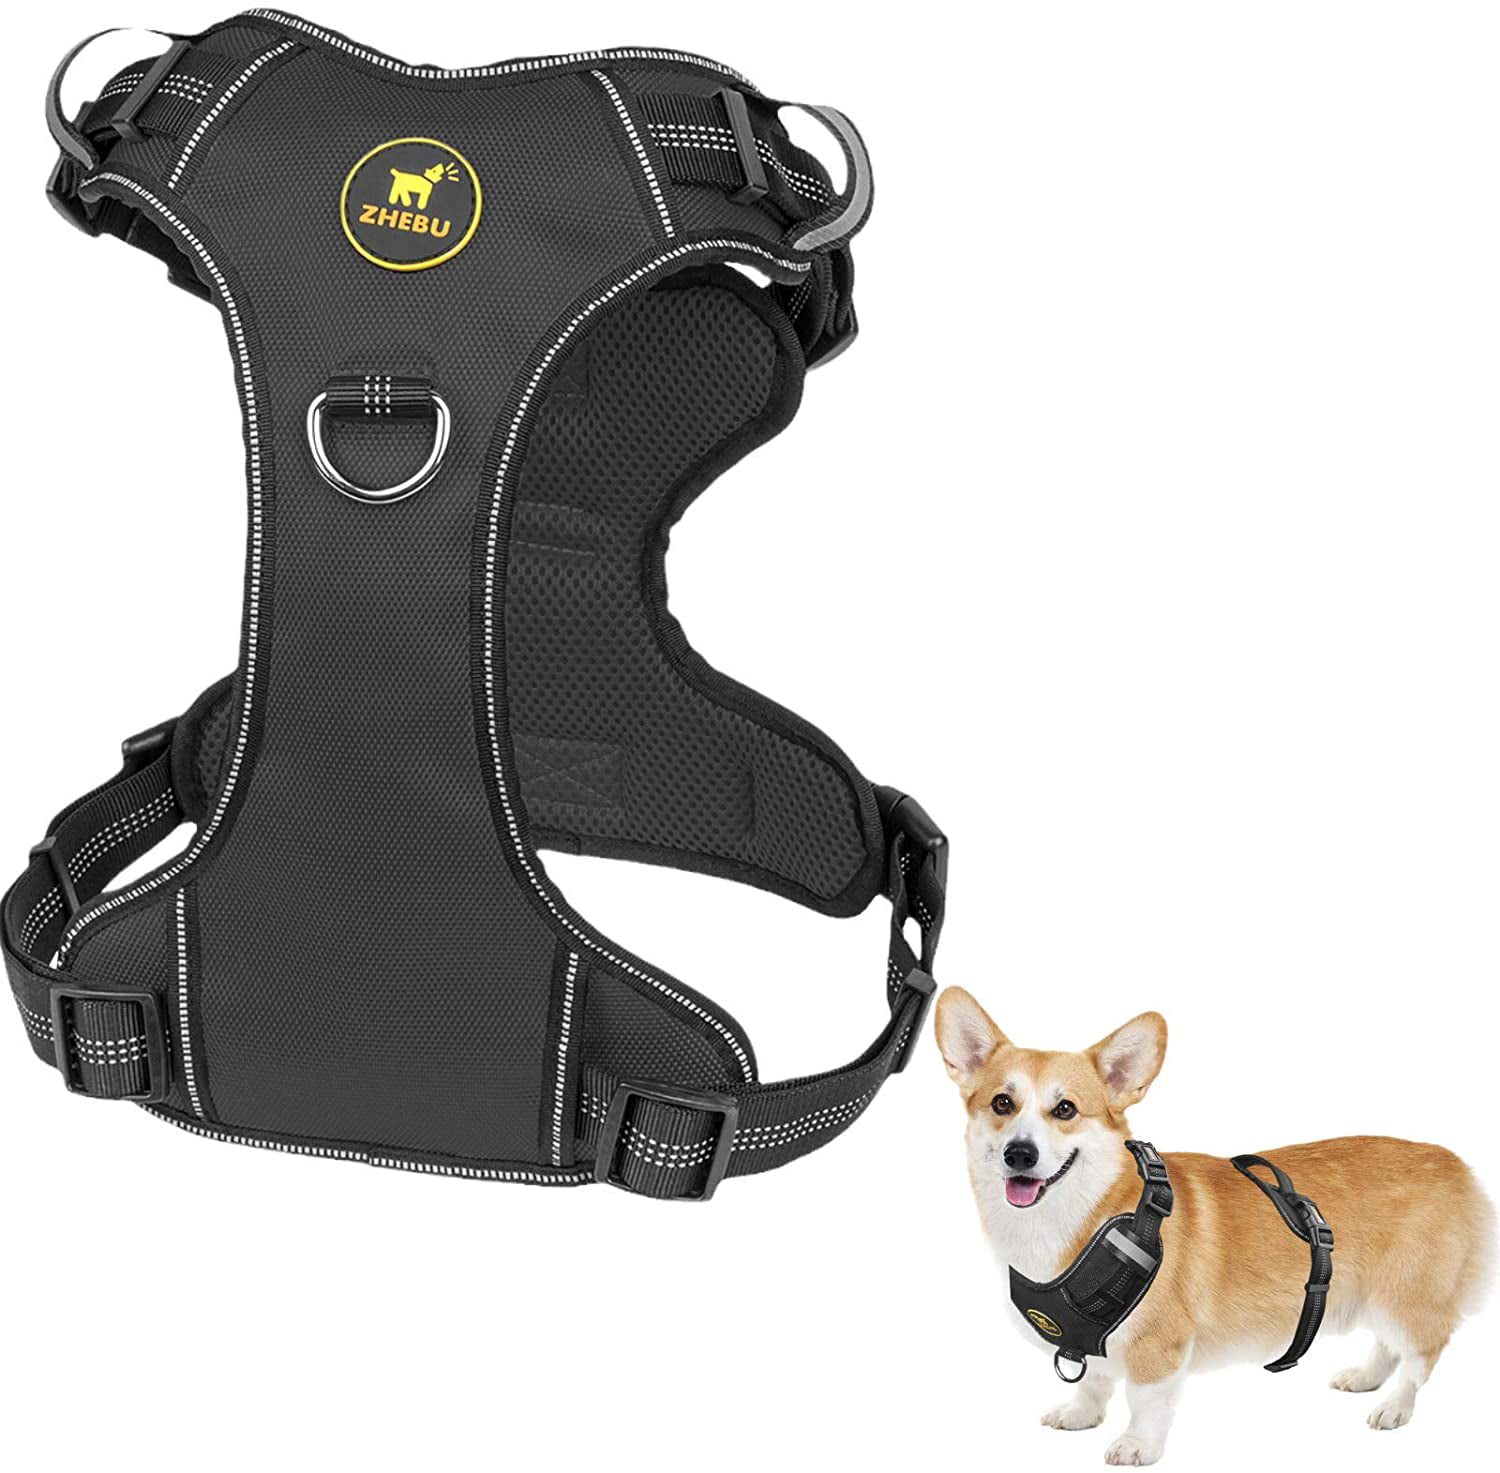 Black, S Adjustable Soft Padded Dog Vest Walking Dog Harness with Easy Control Handle ZHEBU No Pull Dog Harness Reflective Over The Head Dog Harness with 2 Leash Clips